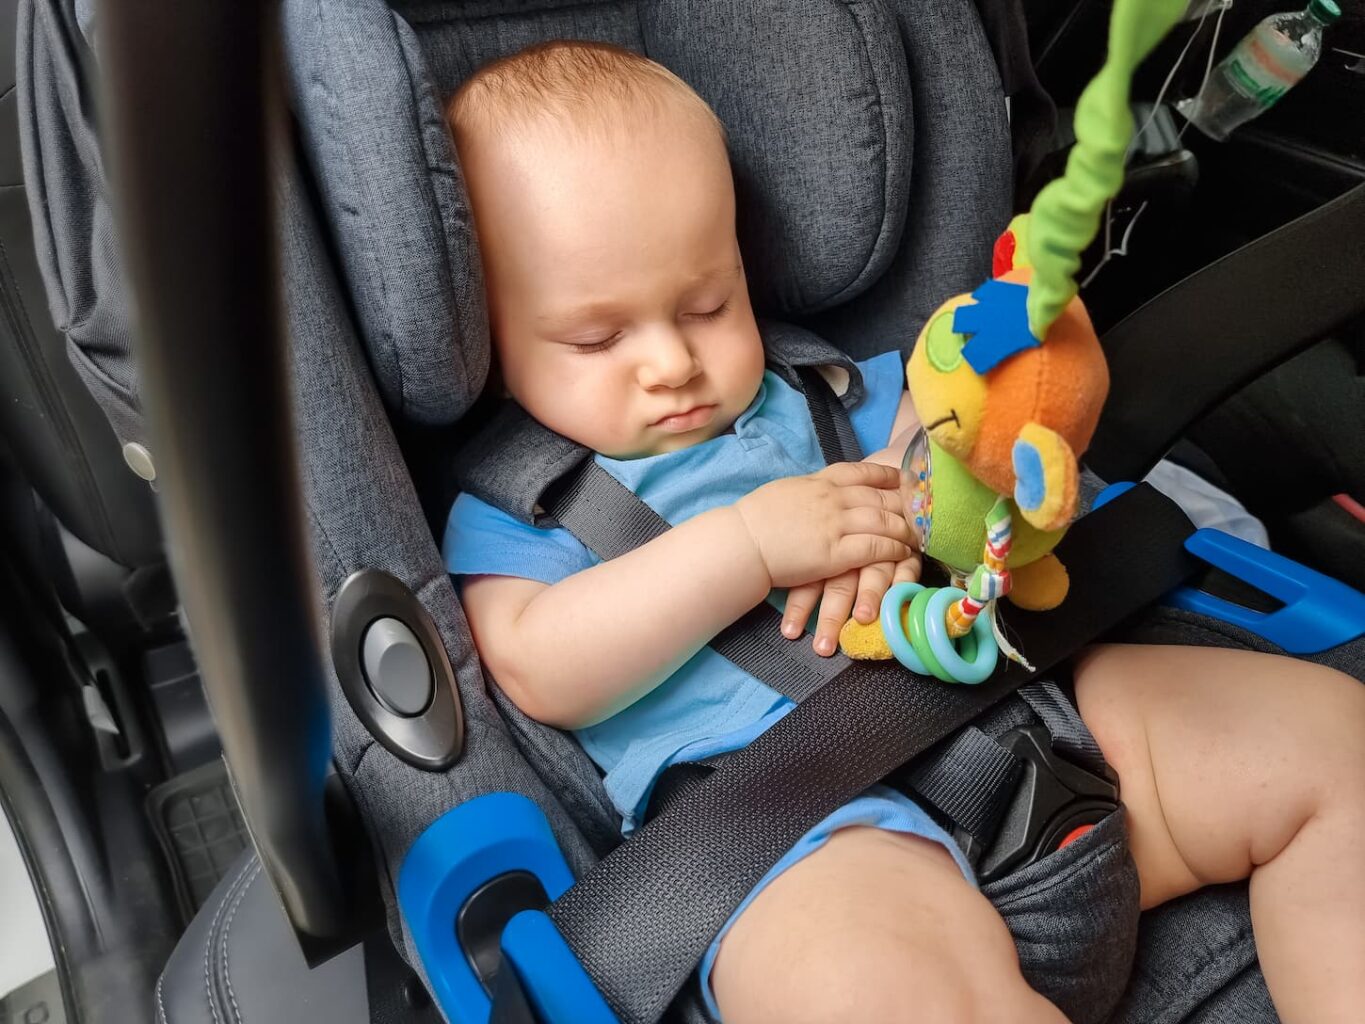 An image of a cute little baby boy sleeping in a car in the safety seat